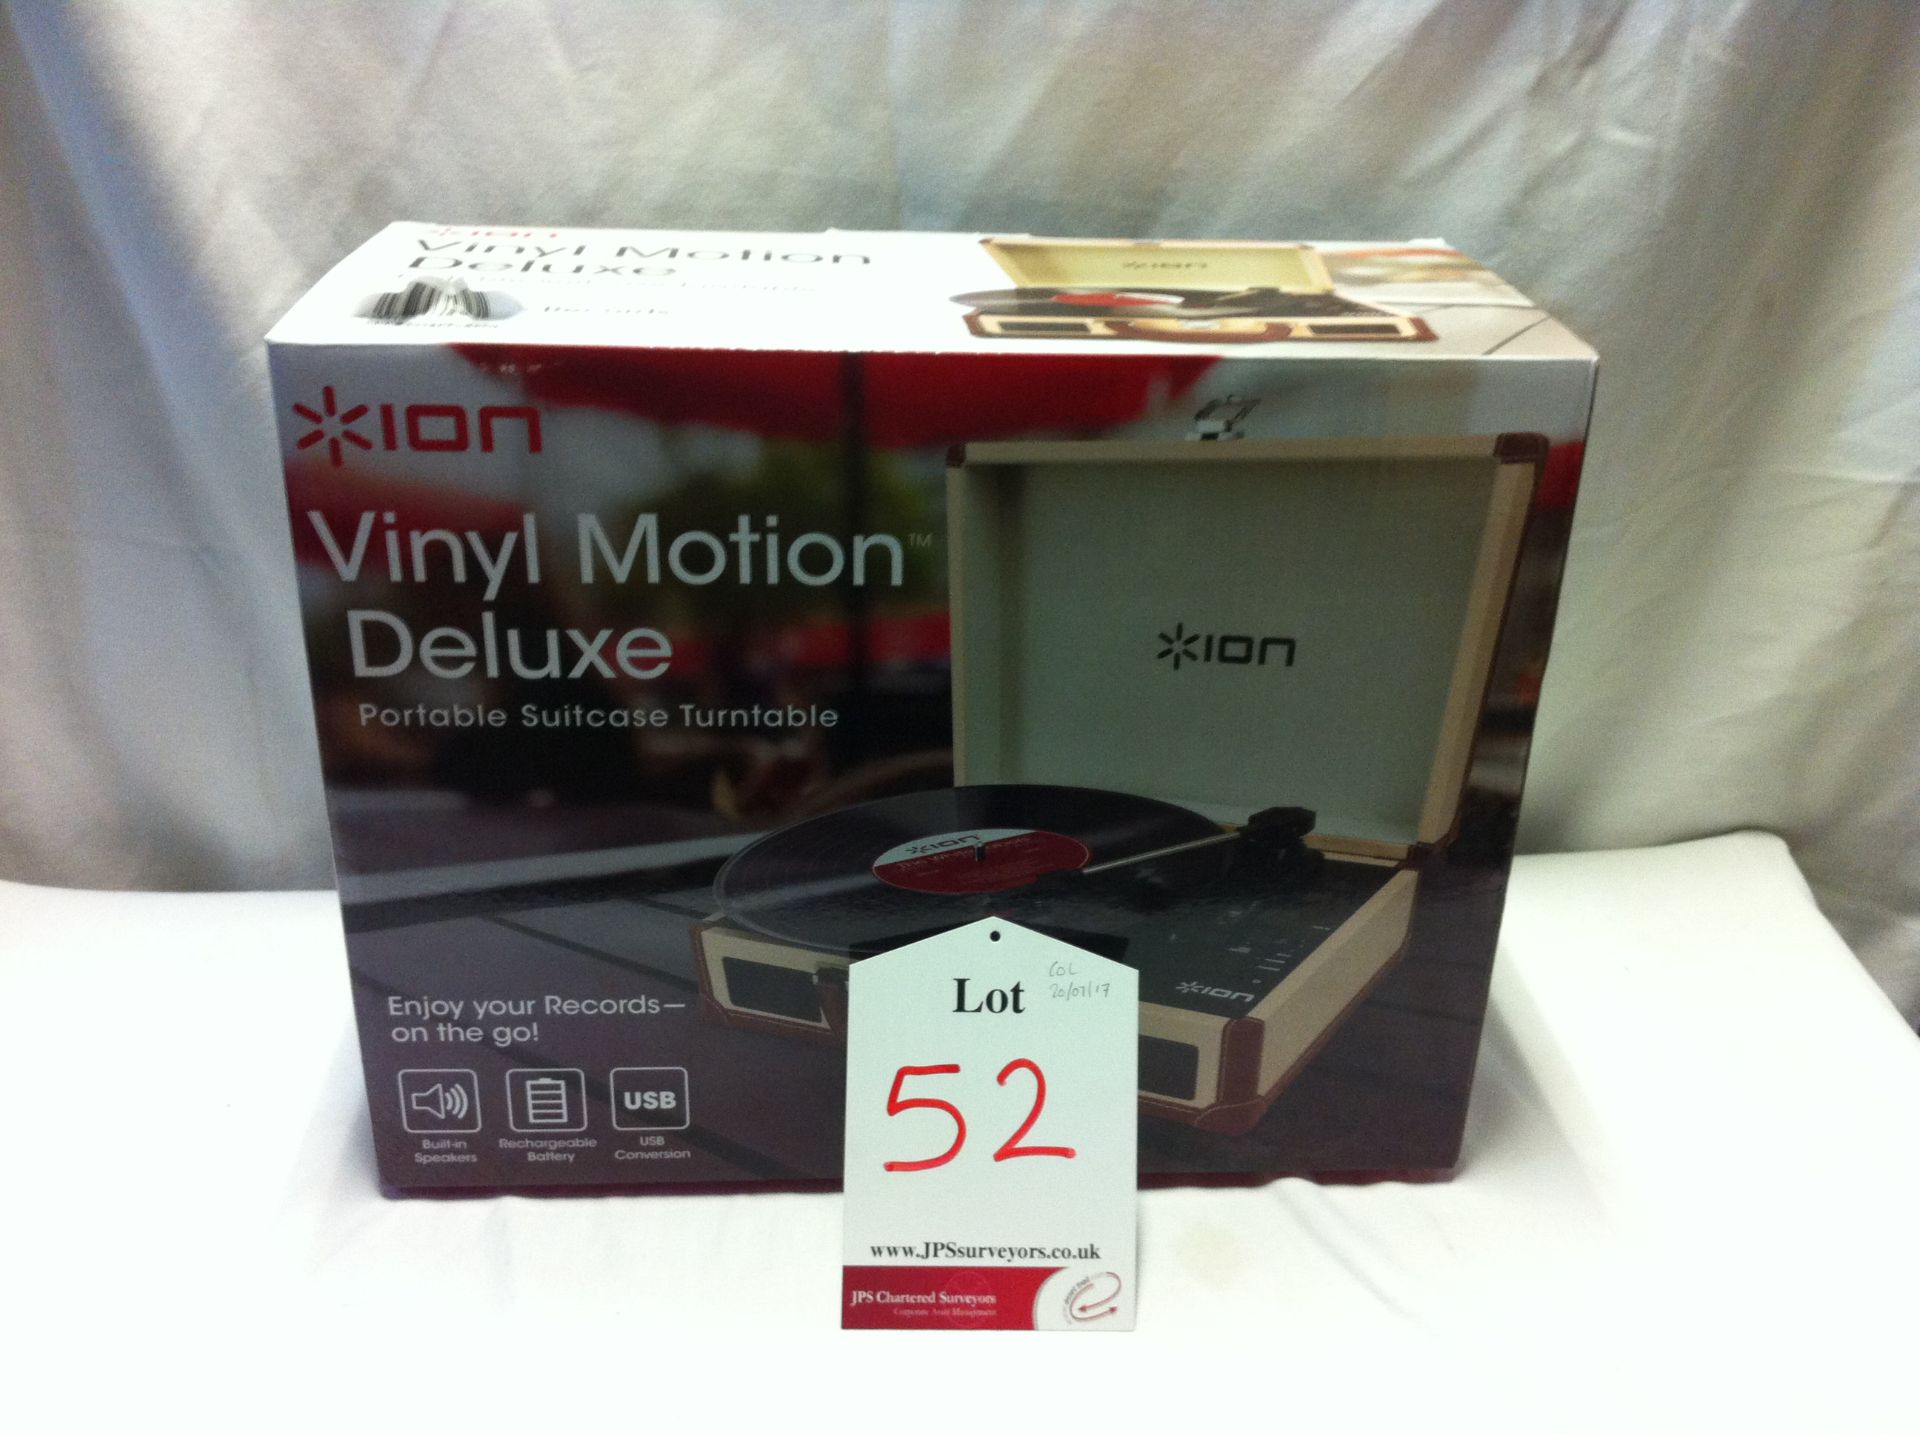 ION Vinyl Motion Deluxe Portable Suitcase Turntable.